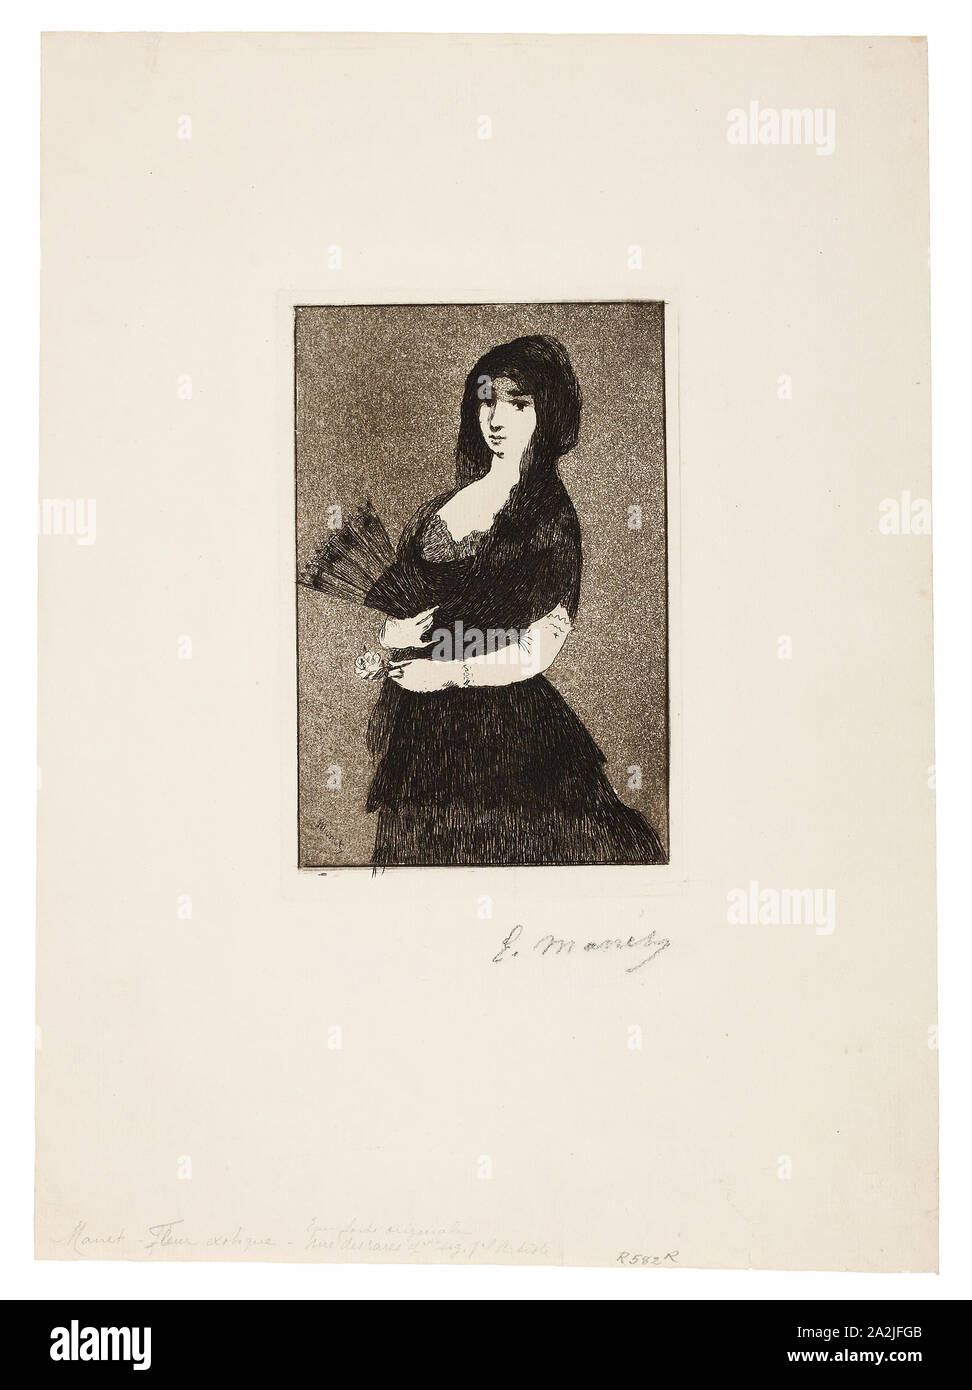 Exotic Flower (Woman in a Mantilla), 1868, Édouard Manet (French, 1832-1883), published by Philippe Burty (French, 1830-1890), written by Armand Renaud (French, 1836-1895), France, Etching and aquatint in warm black on ivory laid paper, 162 × 106 mm (image), 175 × 116 mm (plate), 353 × 257 mm (sheet Stock Photo